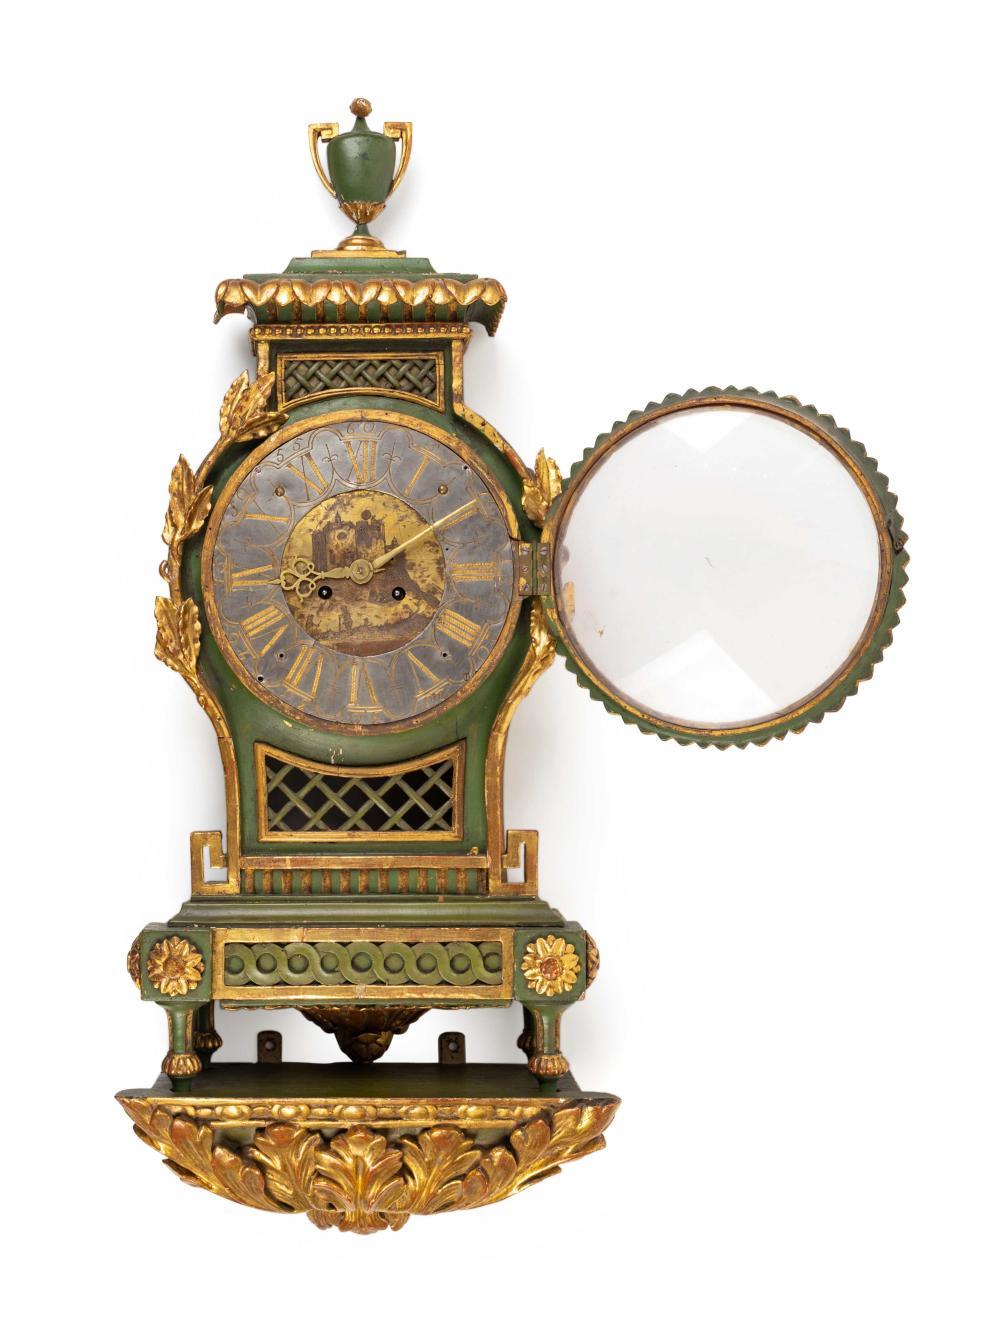 A Swedish neoclassical painted bracket clock and bracket
The clock early 19th century
Measures: Height of clock 28 x width 13 1/2 x depth 6 1/2 inches; height of bracket 7 1/2 x length 15 x depth 6 1/2 inches.
Provenance:
George Gravert